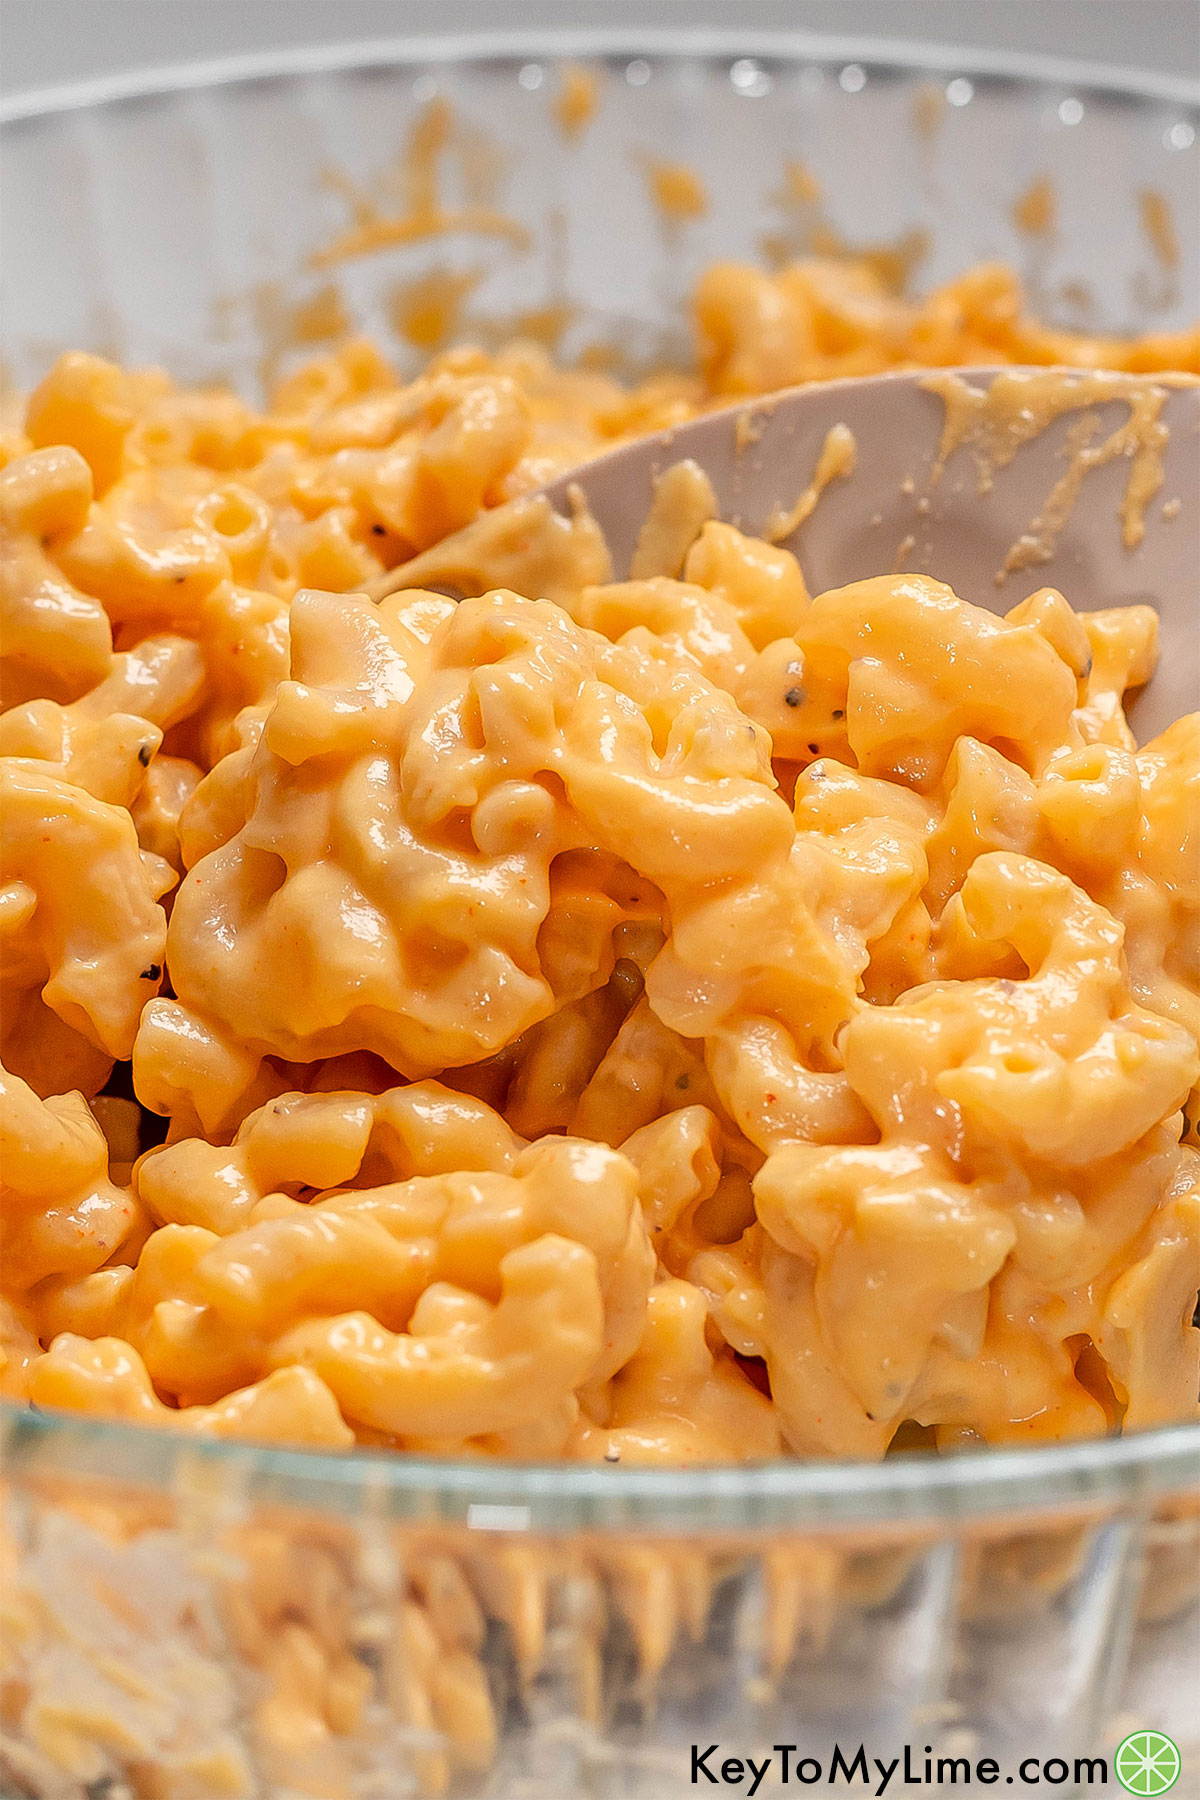 A close up image showing the cheese sauce texture over macaroni.